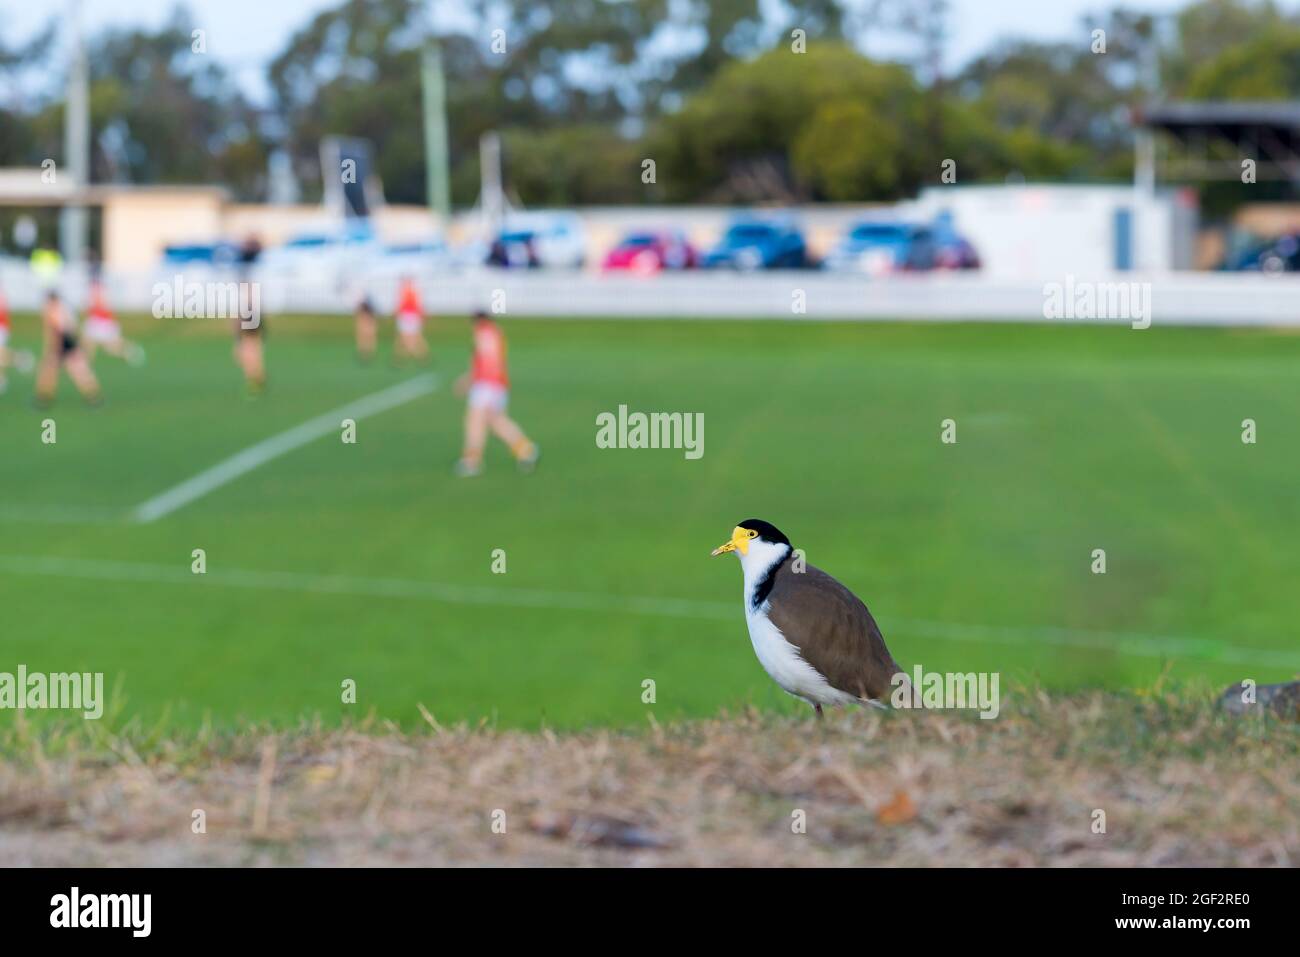 A masked lapwing (Vanellus miles) bird patrols the grass bank at the TCA Ground in Hobart. It is a large and common bird, native to Australia Stock Photo